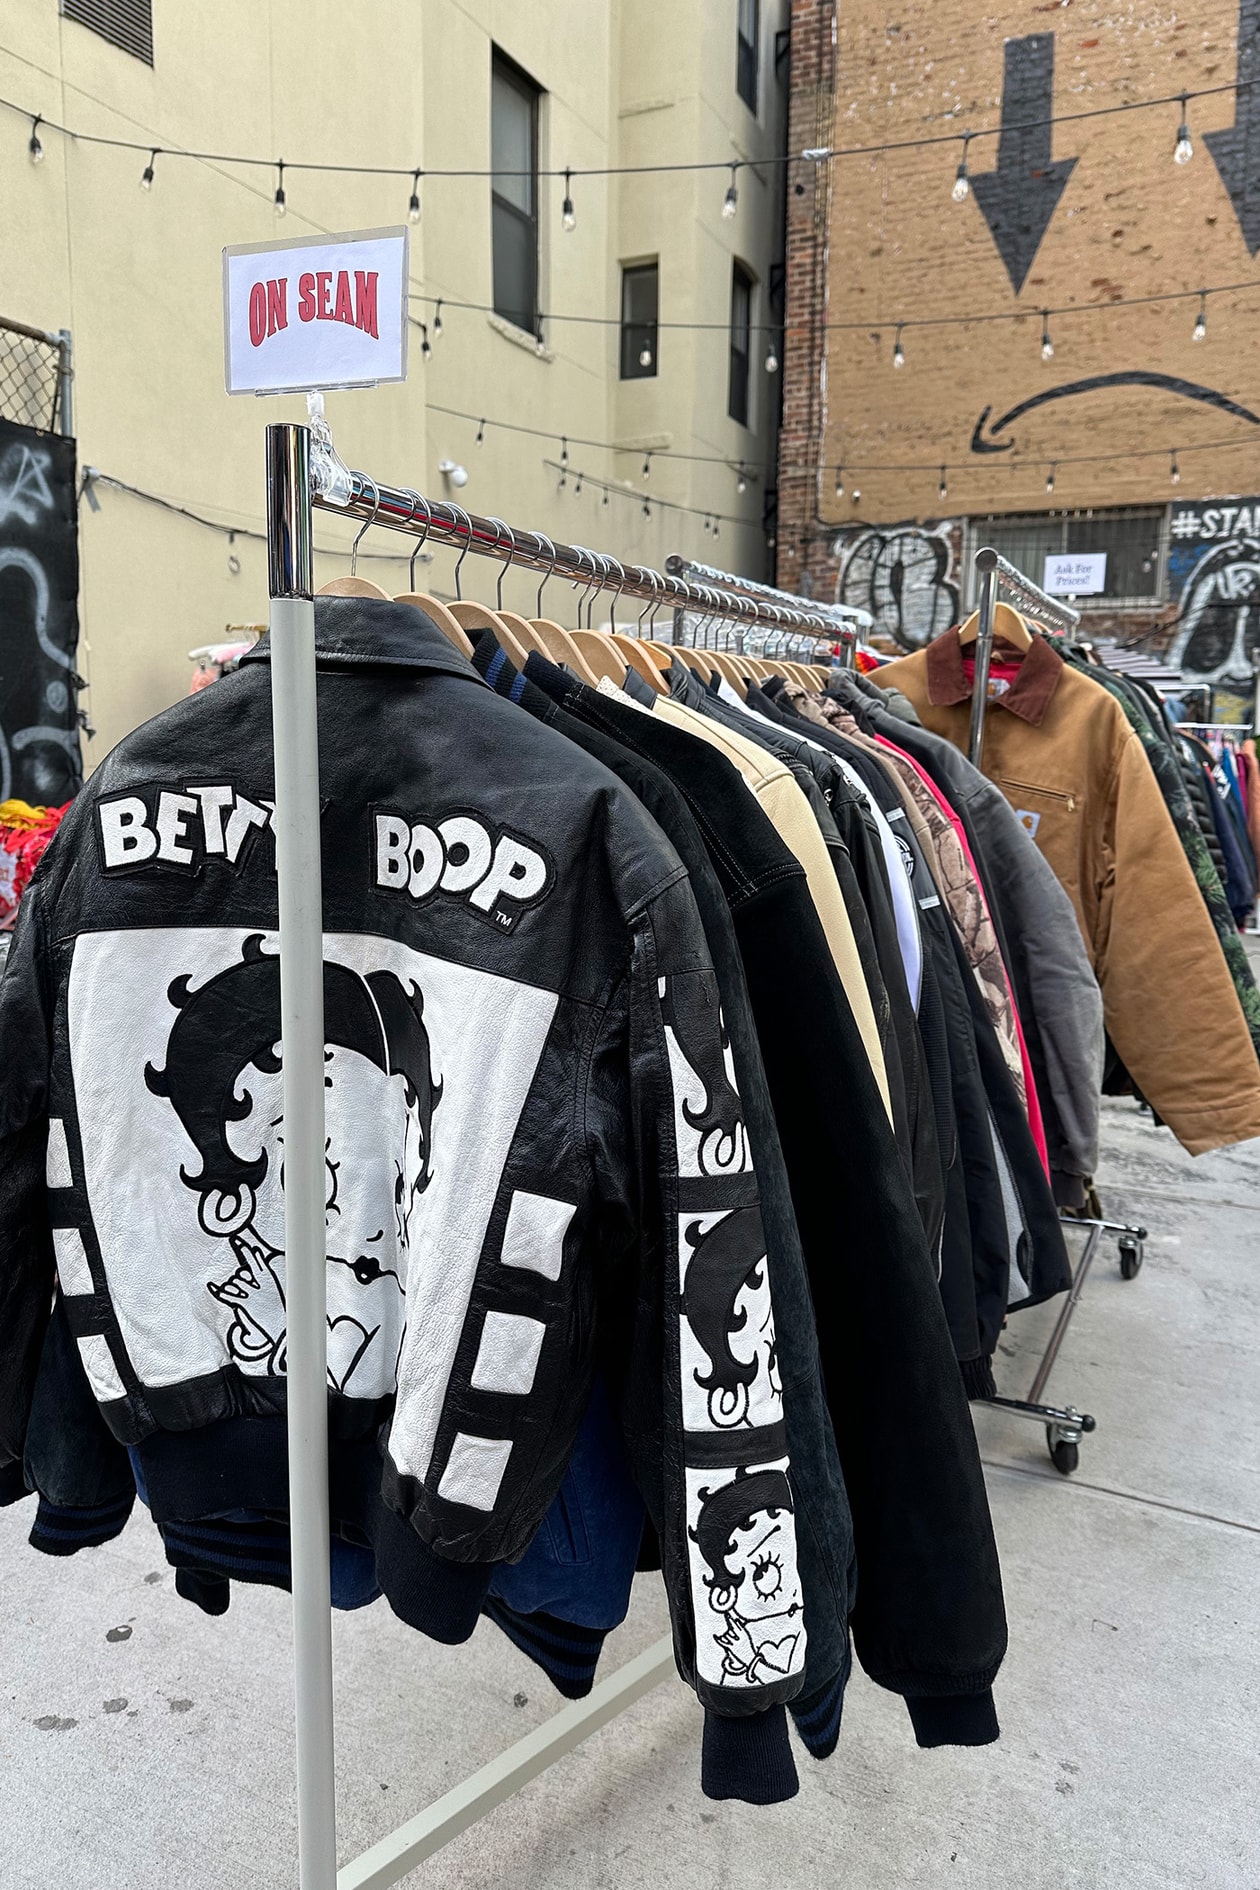 Hypebeast FLEA Powered by Depop Uplifts Local Independent Brands, Vendors, and Creatives